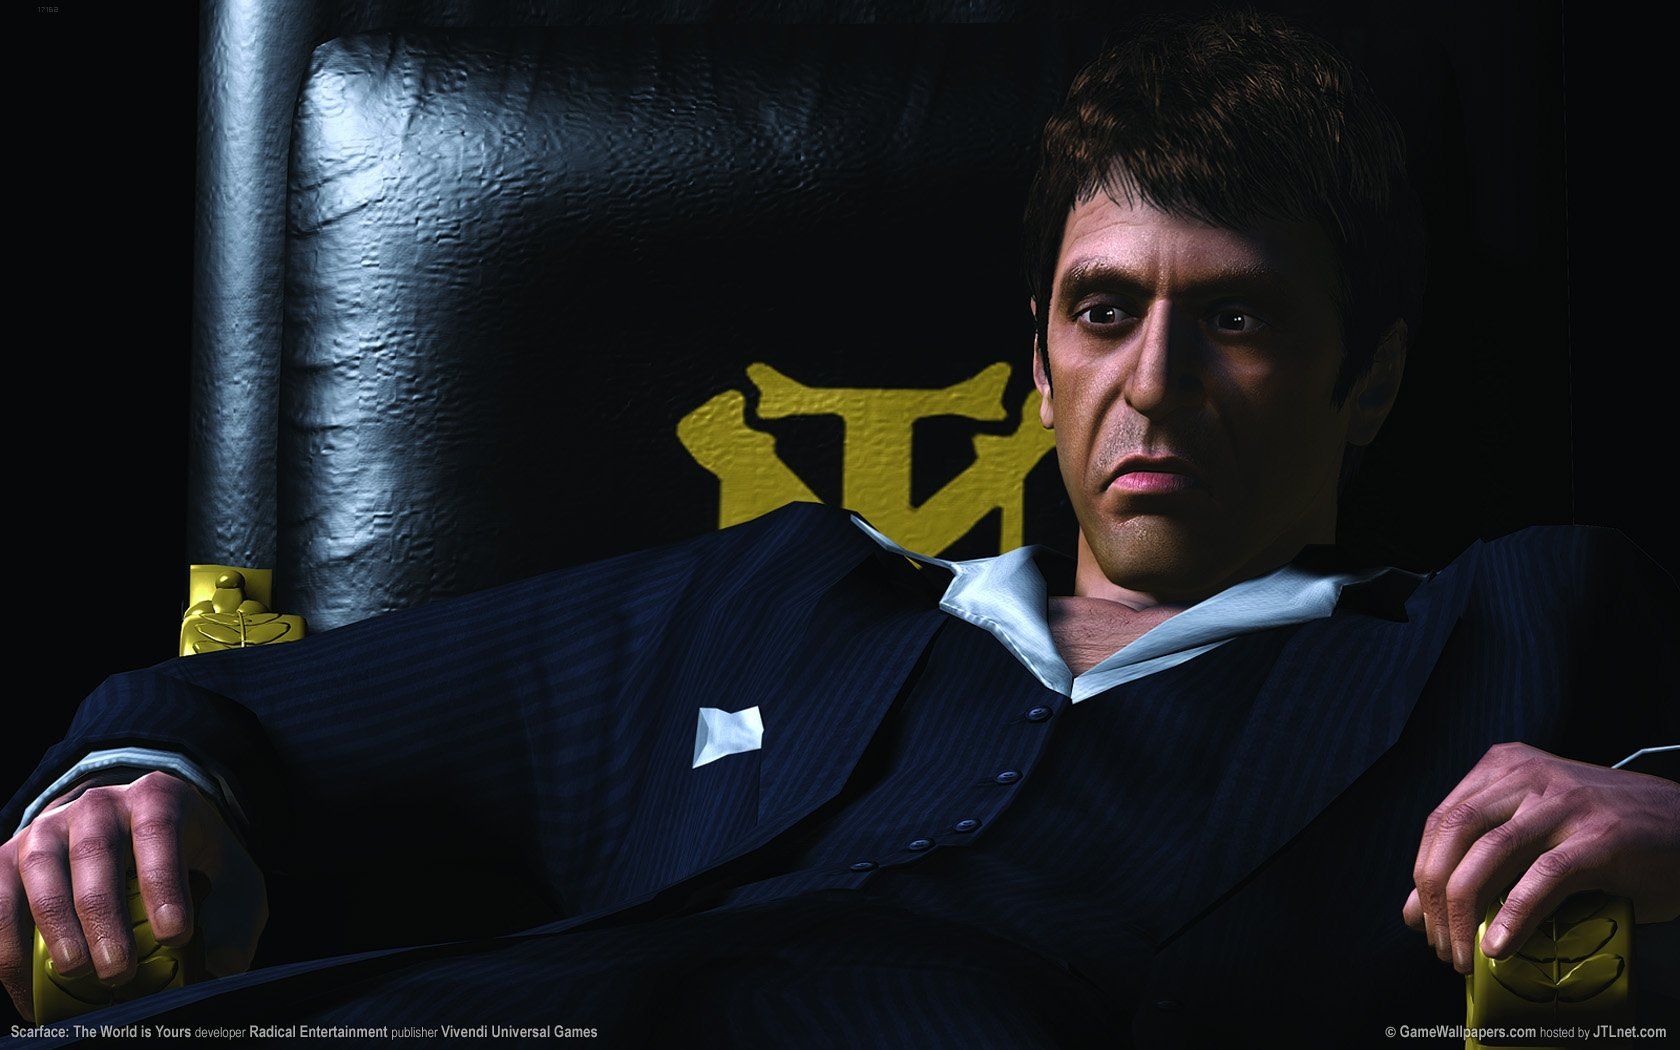 Free download Scarface Wallpaper tony montana al pacino 1680x1050 [1680x1050] for your Desktop, Mobile & Tablet. Explore Tony Montana Wallpaper. Scarface HD Wallpaper, Scarface Wallpaper, Montana Image Wallpaper